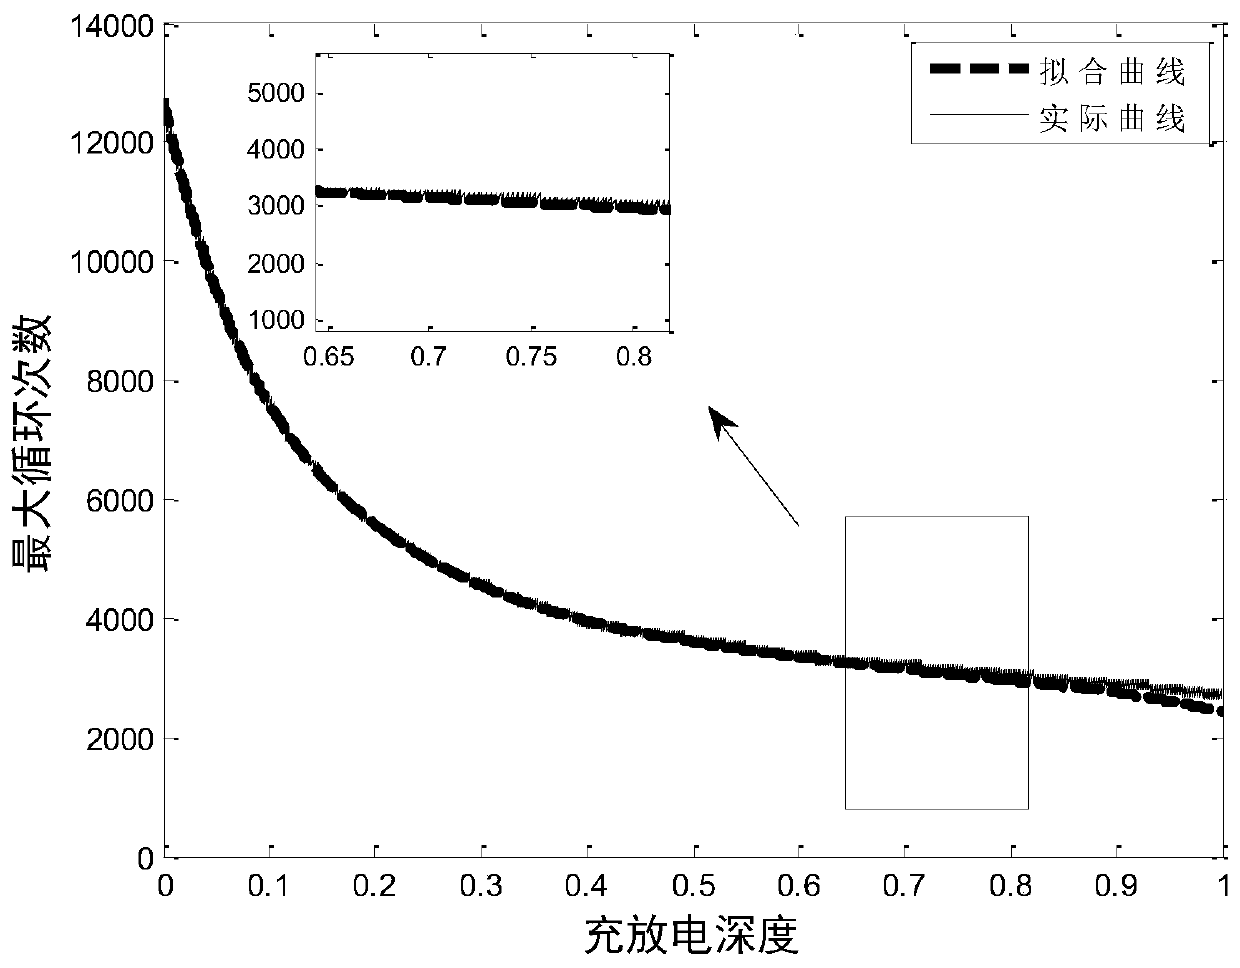 Lithium iron phosphate battery modeling and SOC estimation method considering capacity loss